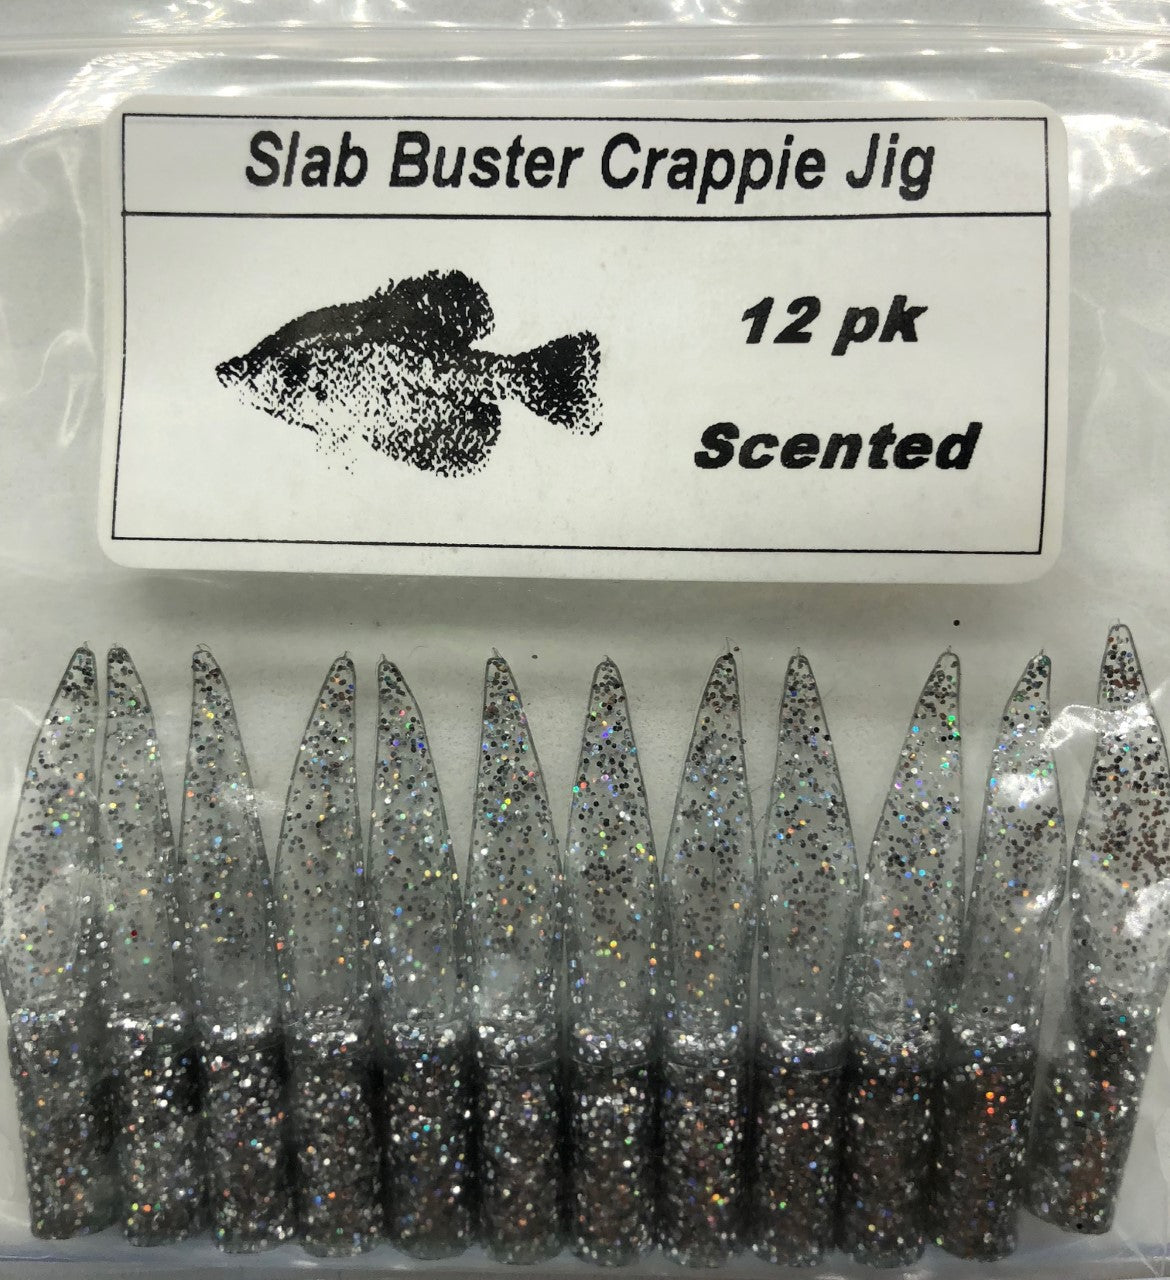 Slab Buster crappie jigs and lures